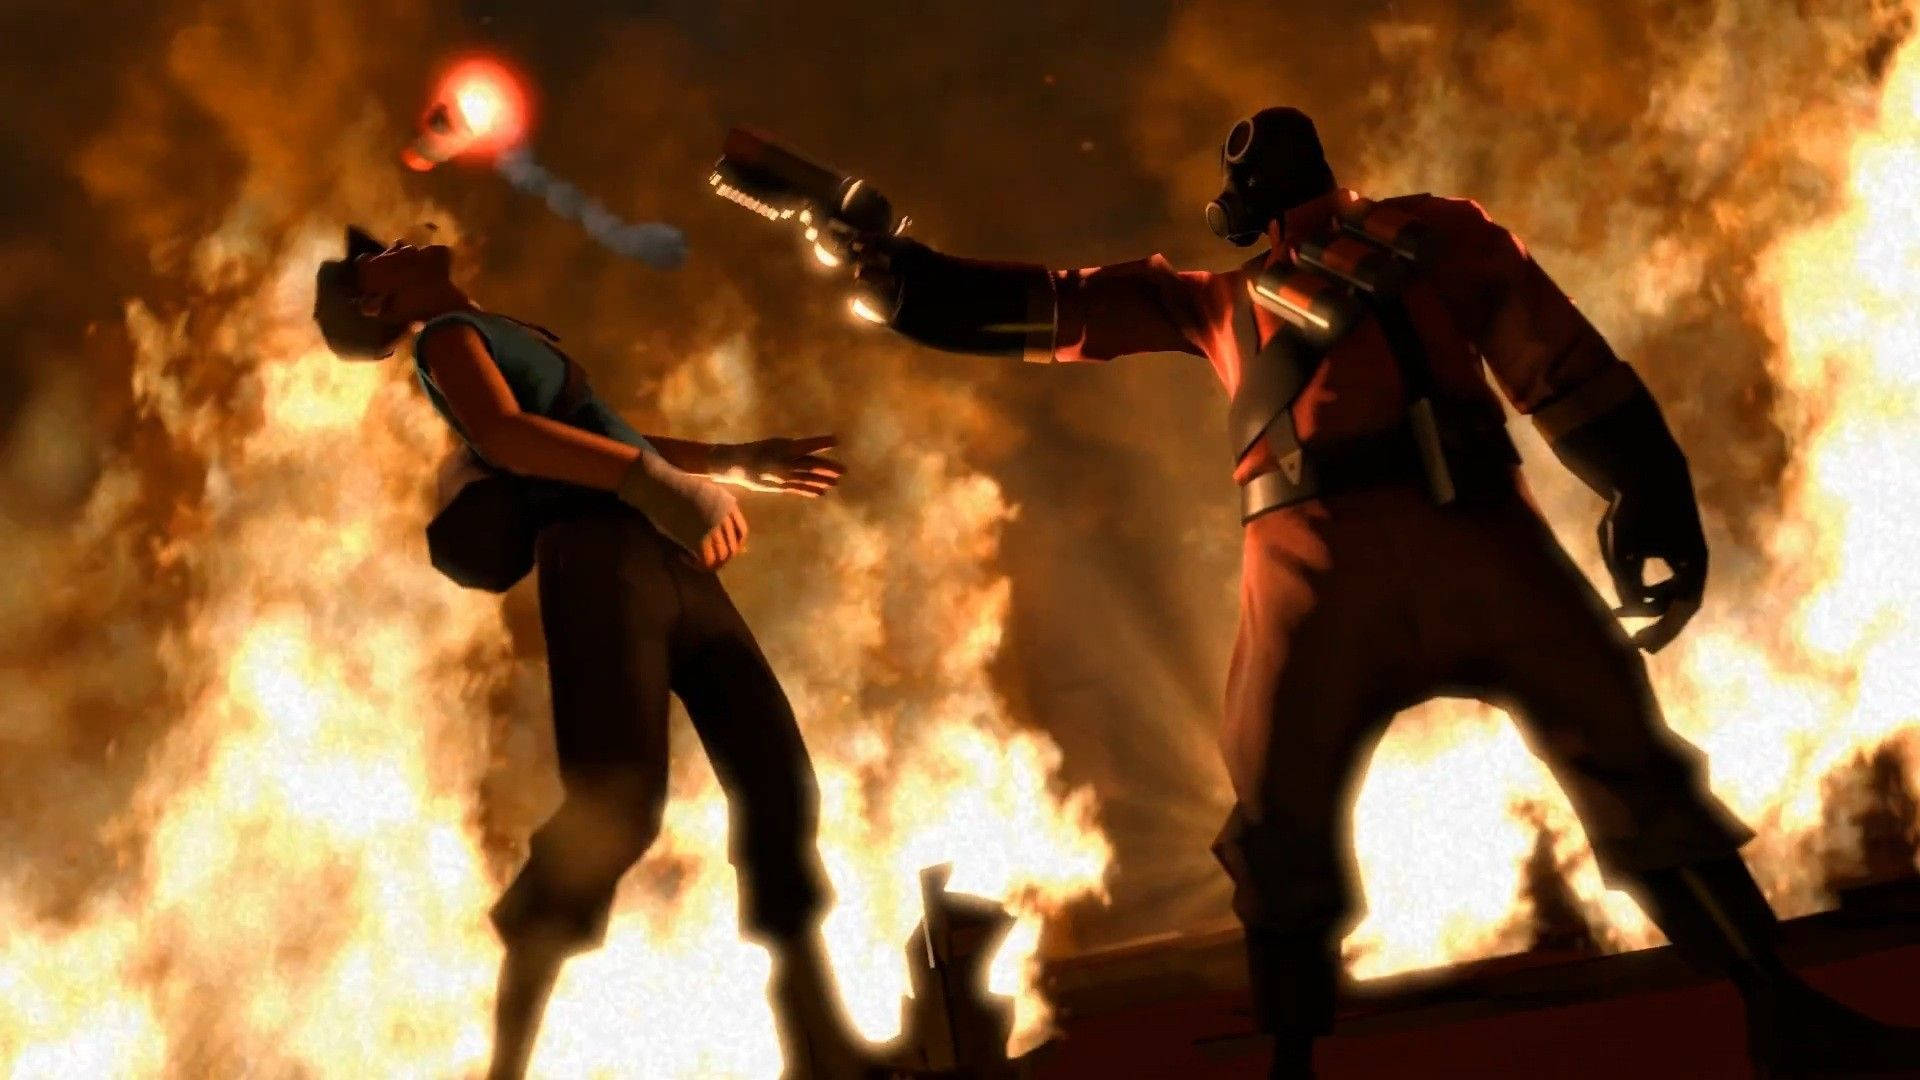 Epic Battle Scene Between Pyro And Scout - Team Fortress 2